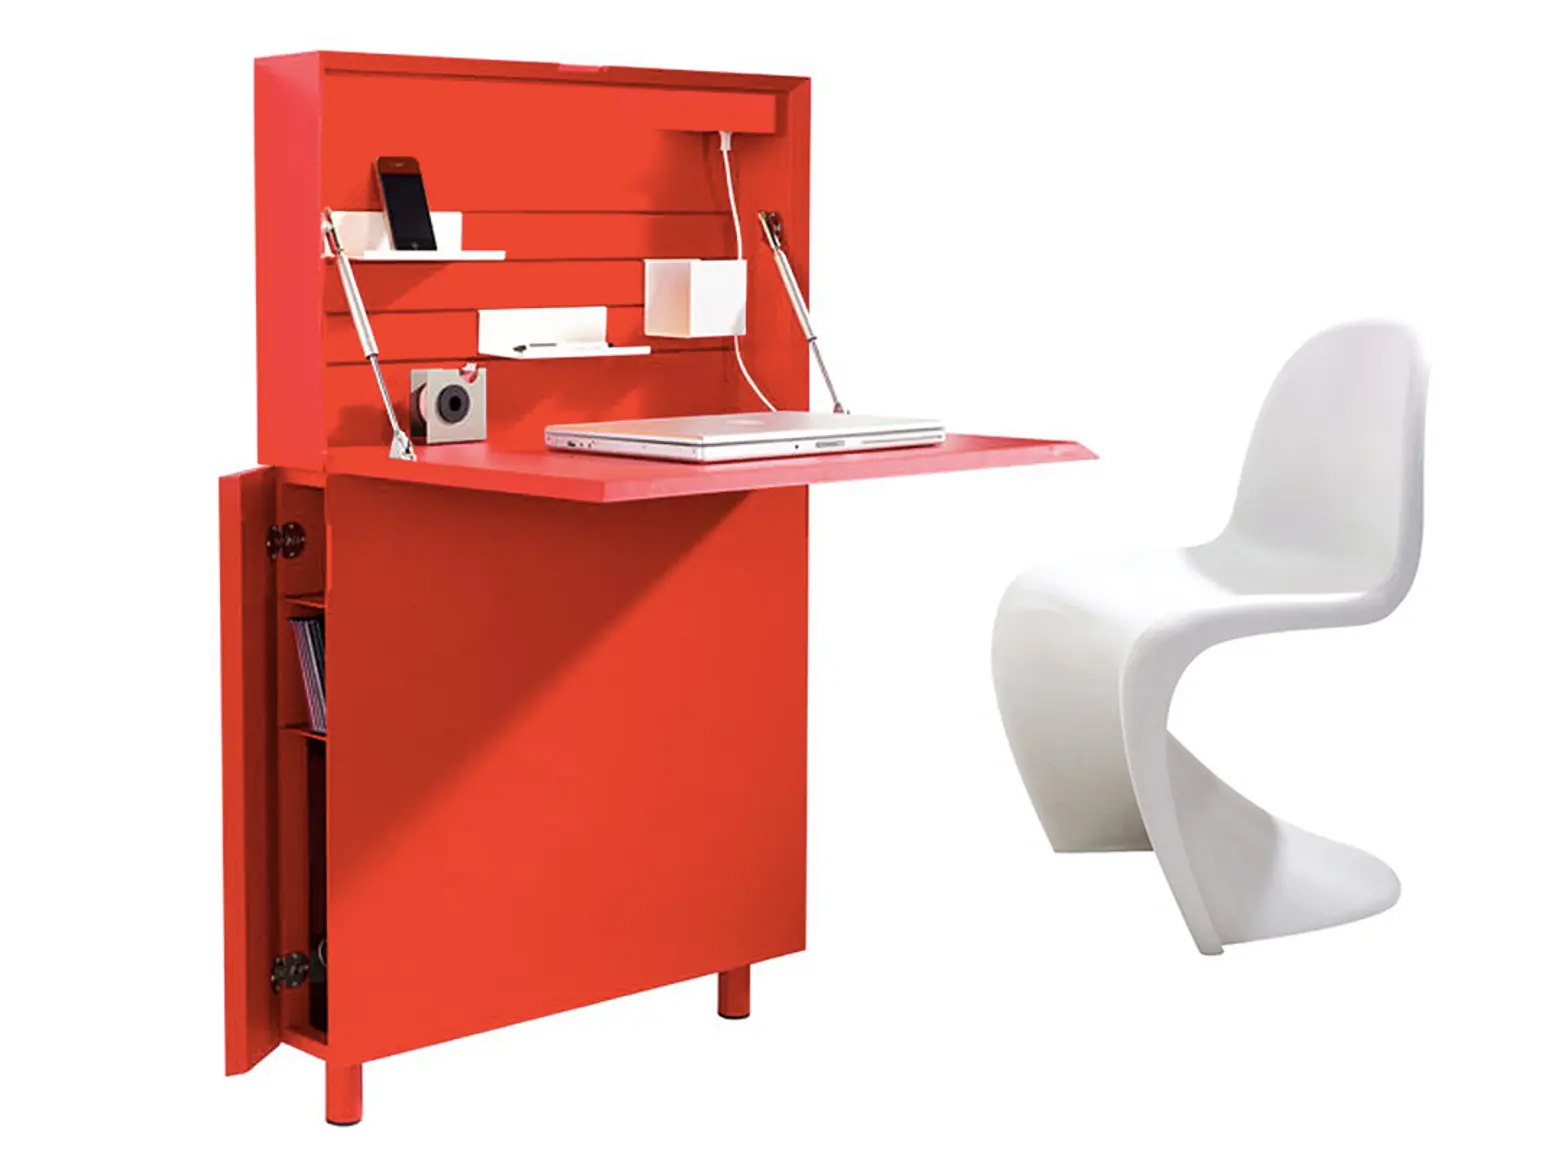 Michael Hilgers’s ‘Flatmate’ Desk Conveniently Unfolds When It’s Time to Work